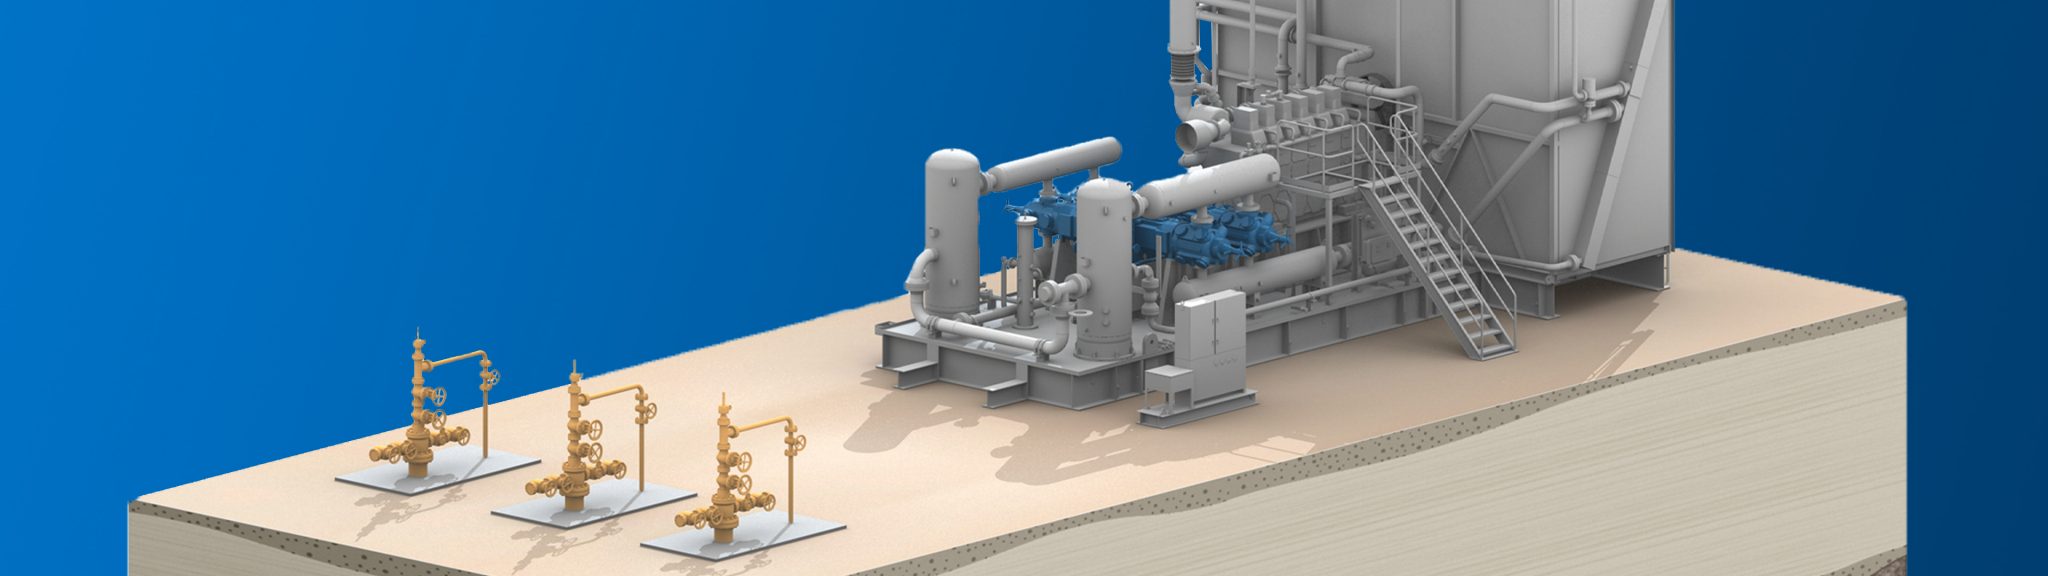 A rendering of a compressor station